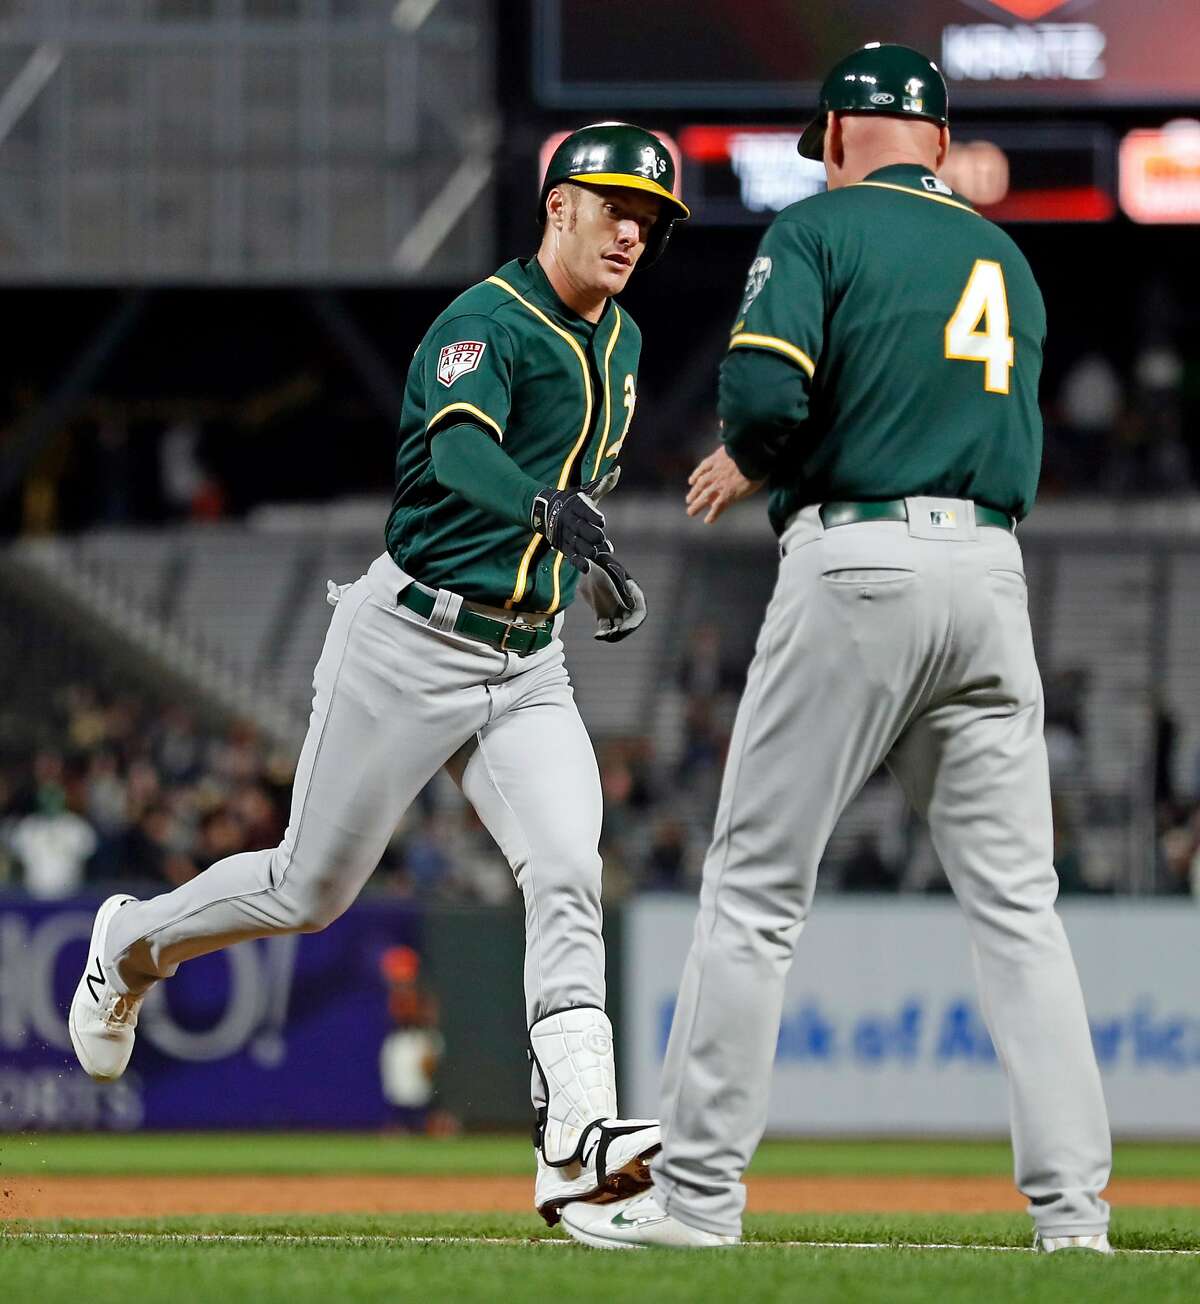 Oakland Athletics' Mark Canha is greeted by Matt Williams as Canha rounds third base after hitting 2-run home run in 4th inning against San Francisco Giants' Jeff Samardzija in Bay Bridge Series game at Oracle Park in San Francisco, Calif., on Tuesday, March 26, 2019.